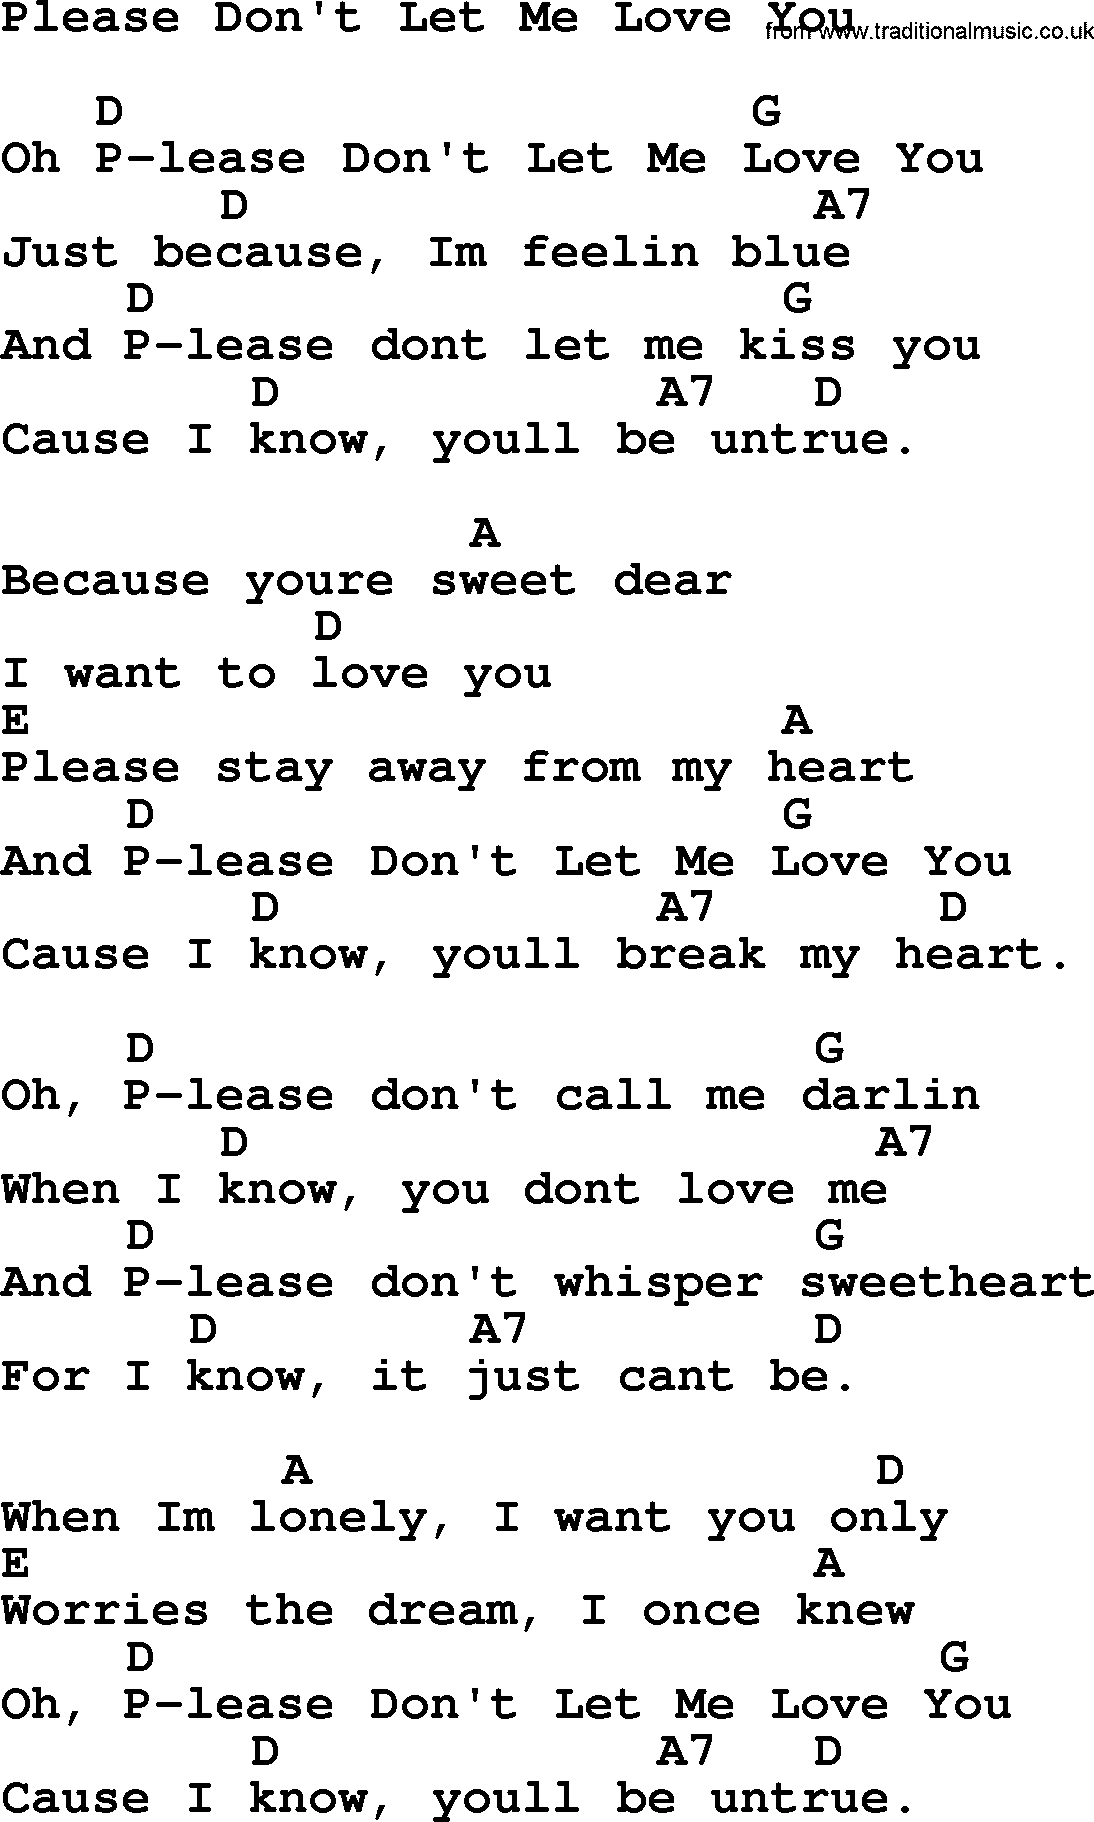 Hank Williams song Please Don't Let Me Love You, lyrics and chords